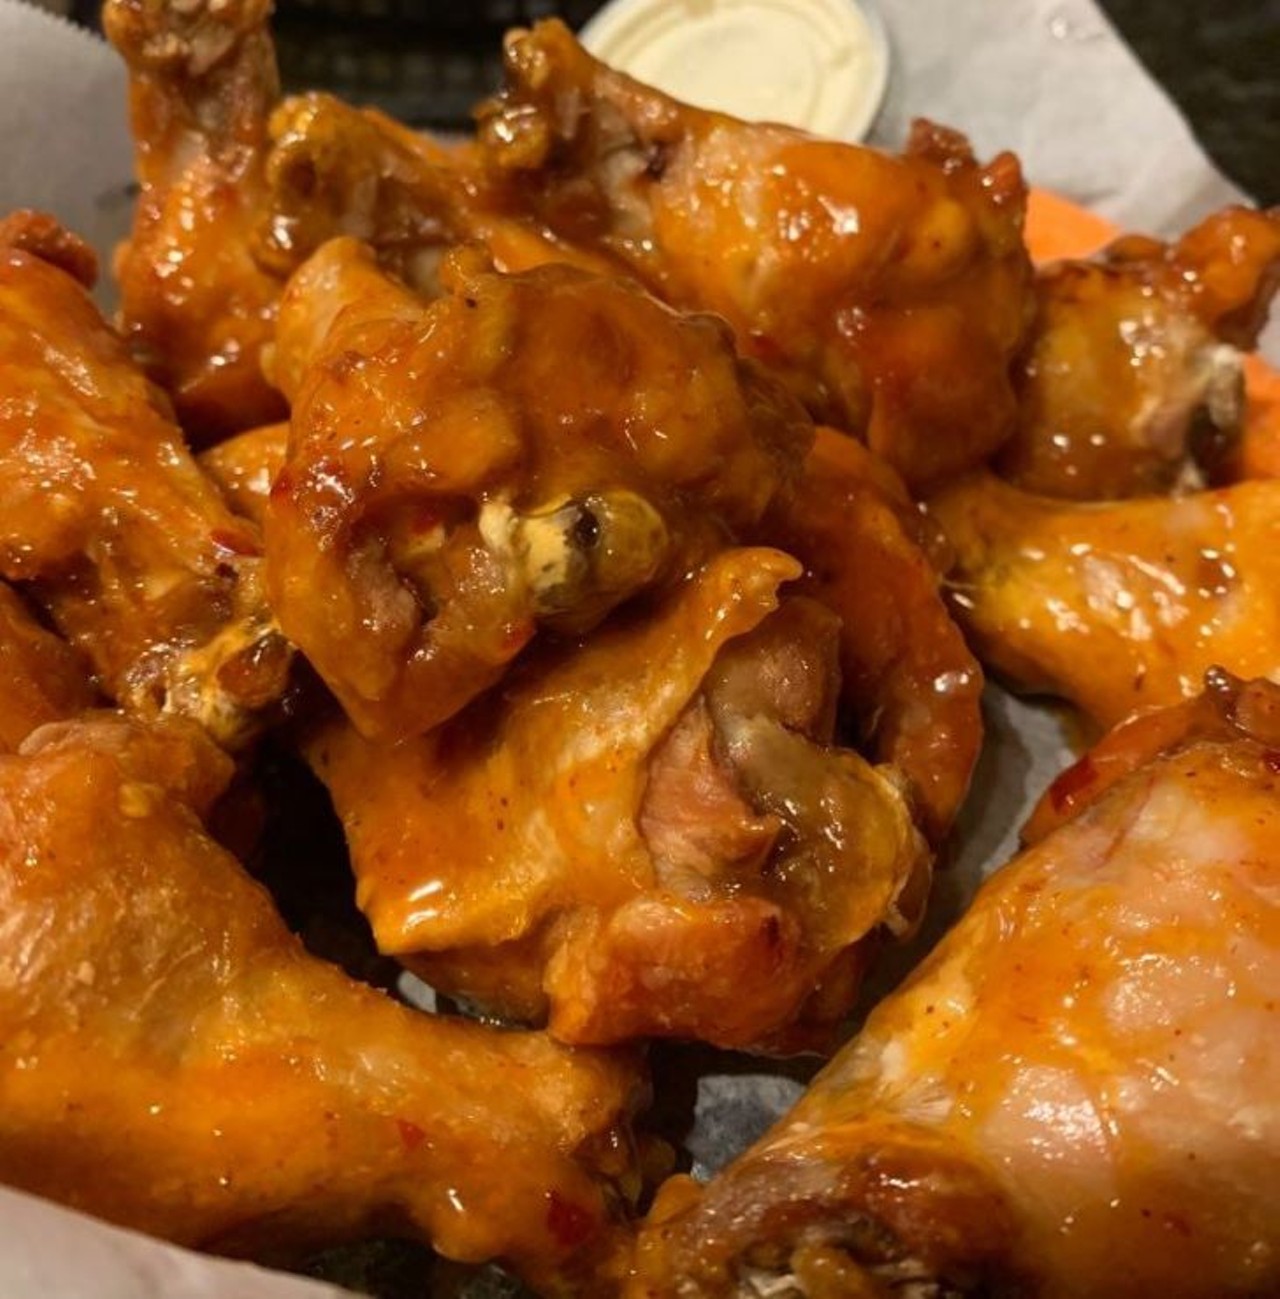 Friendly Confines 
3088 Aloma Ave., Winter Park, 407-478-0506
Friendly Confines has locations in Lake Mary, Winter Park, and Altamonte Springs so everyone can try their delicious &#147;claws&#148; and wings.
Photo via My Friendly Confines on Facebook